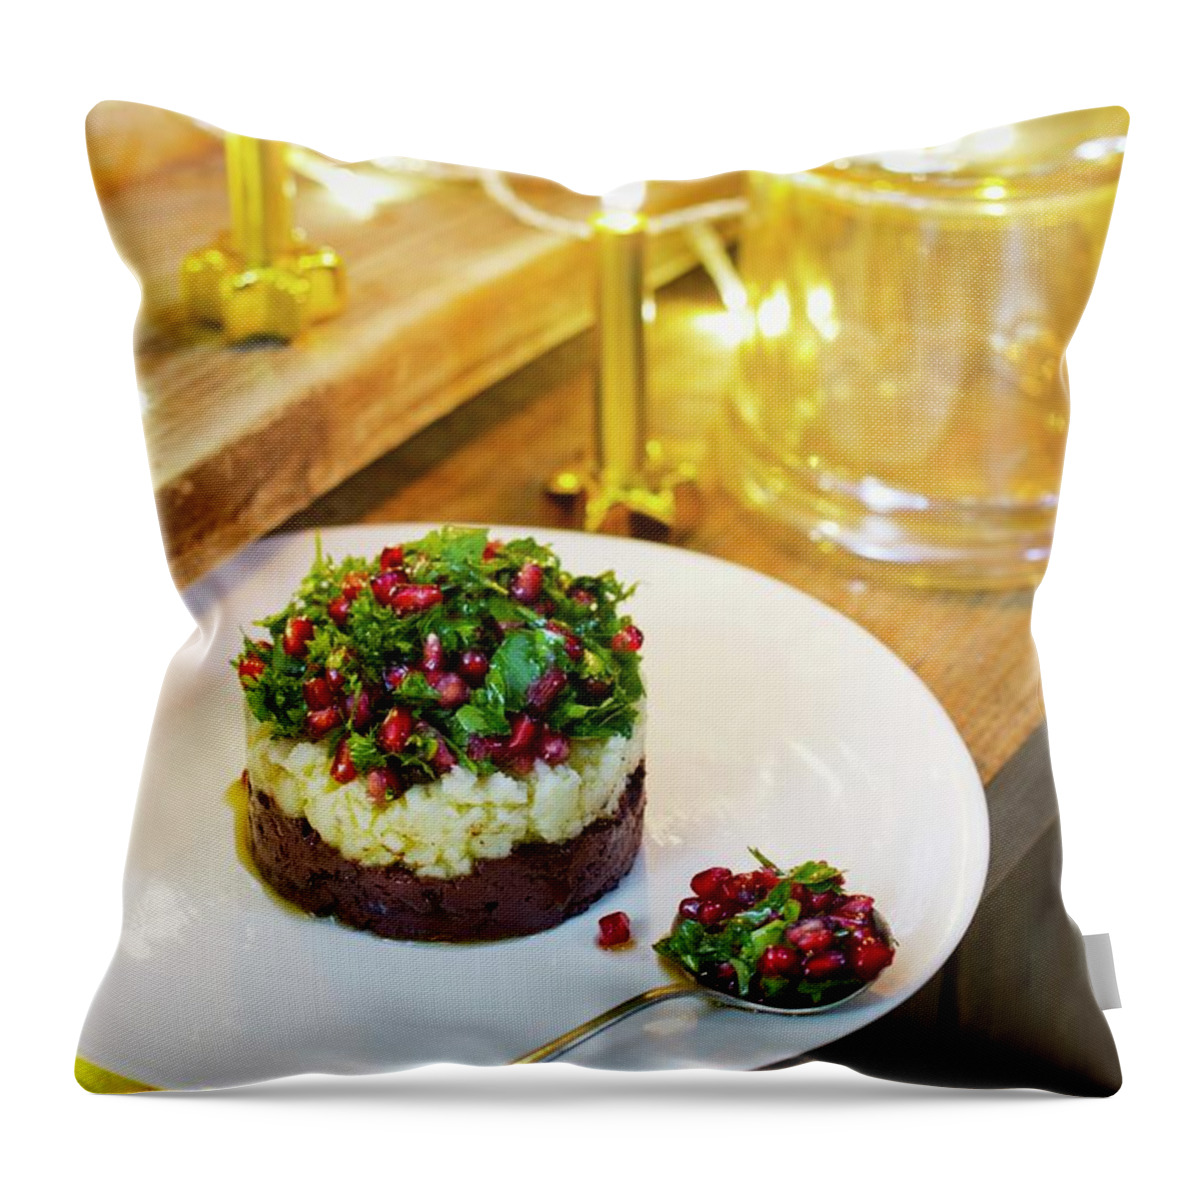 Ip_11160416 Throw Pillow featuring the photograph Individual Prune Layer Cake Topped With Parsley And Pomegranate Salad by Atelier Mai 98